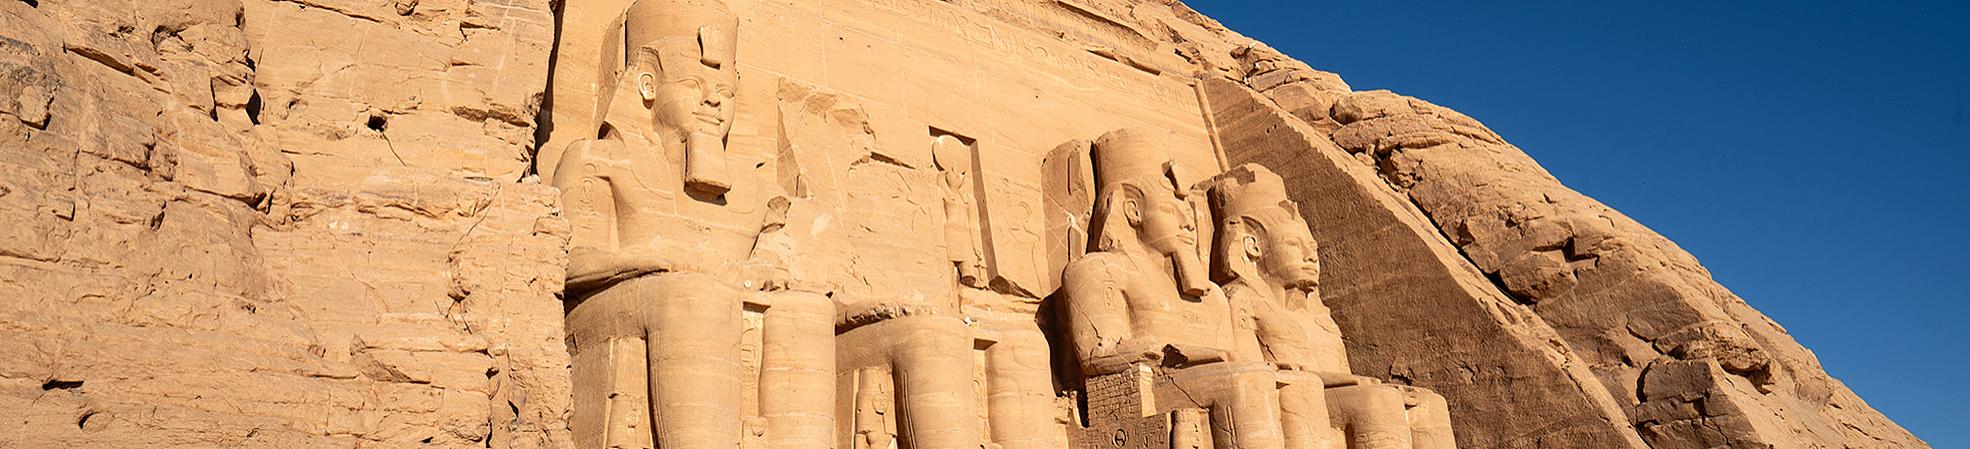 10 Most Recommended Places in Egypt for First Timer